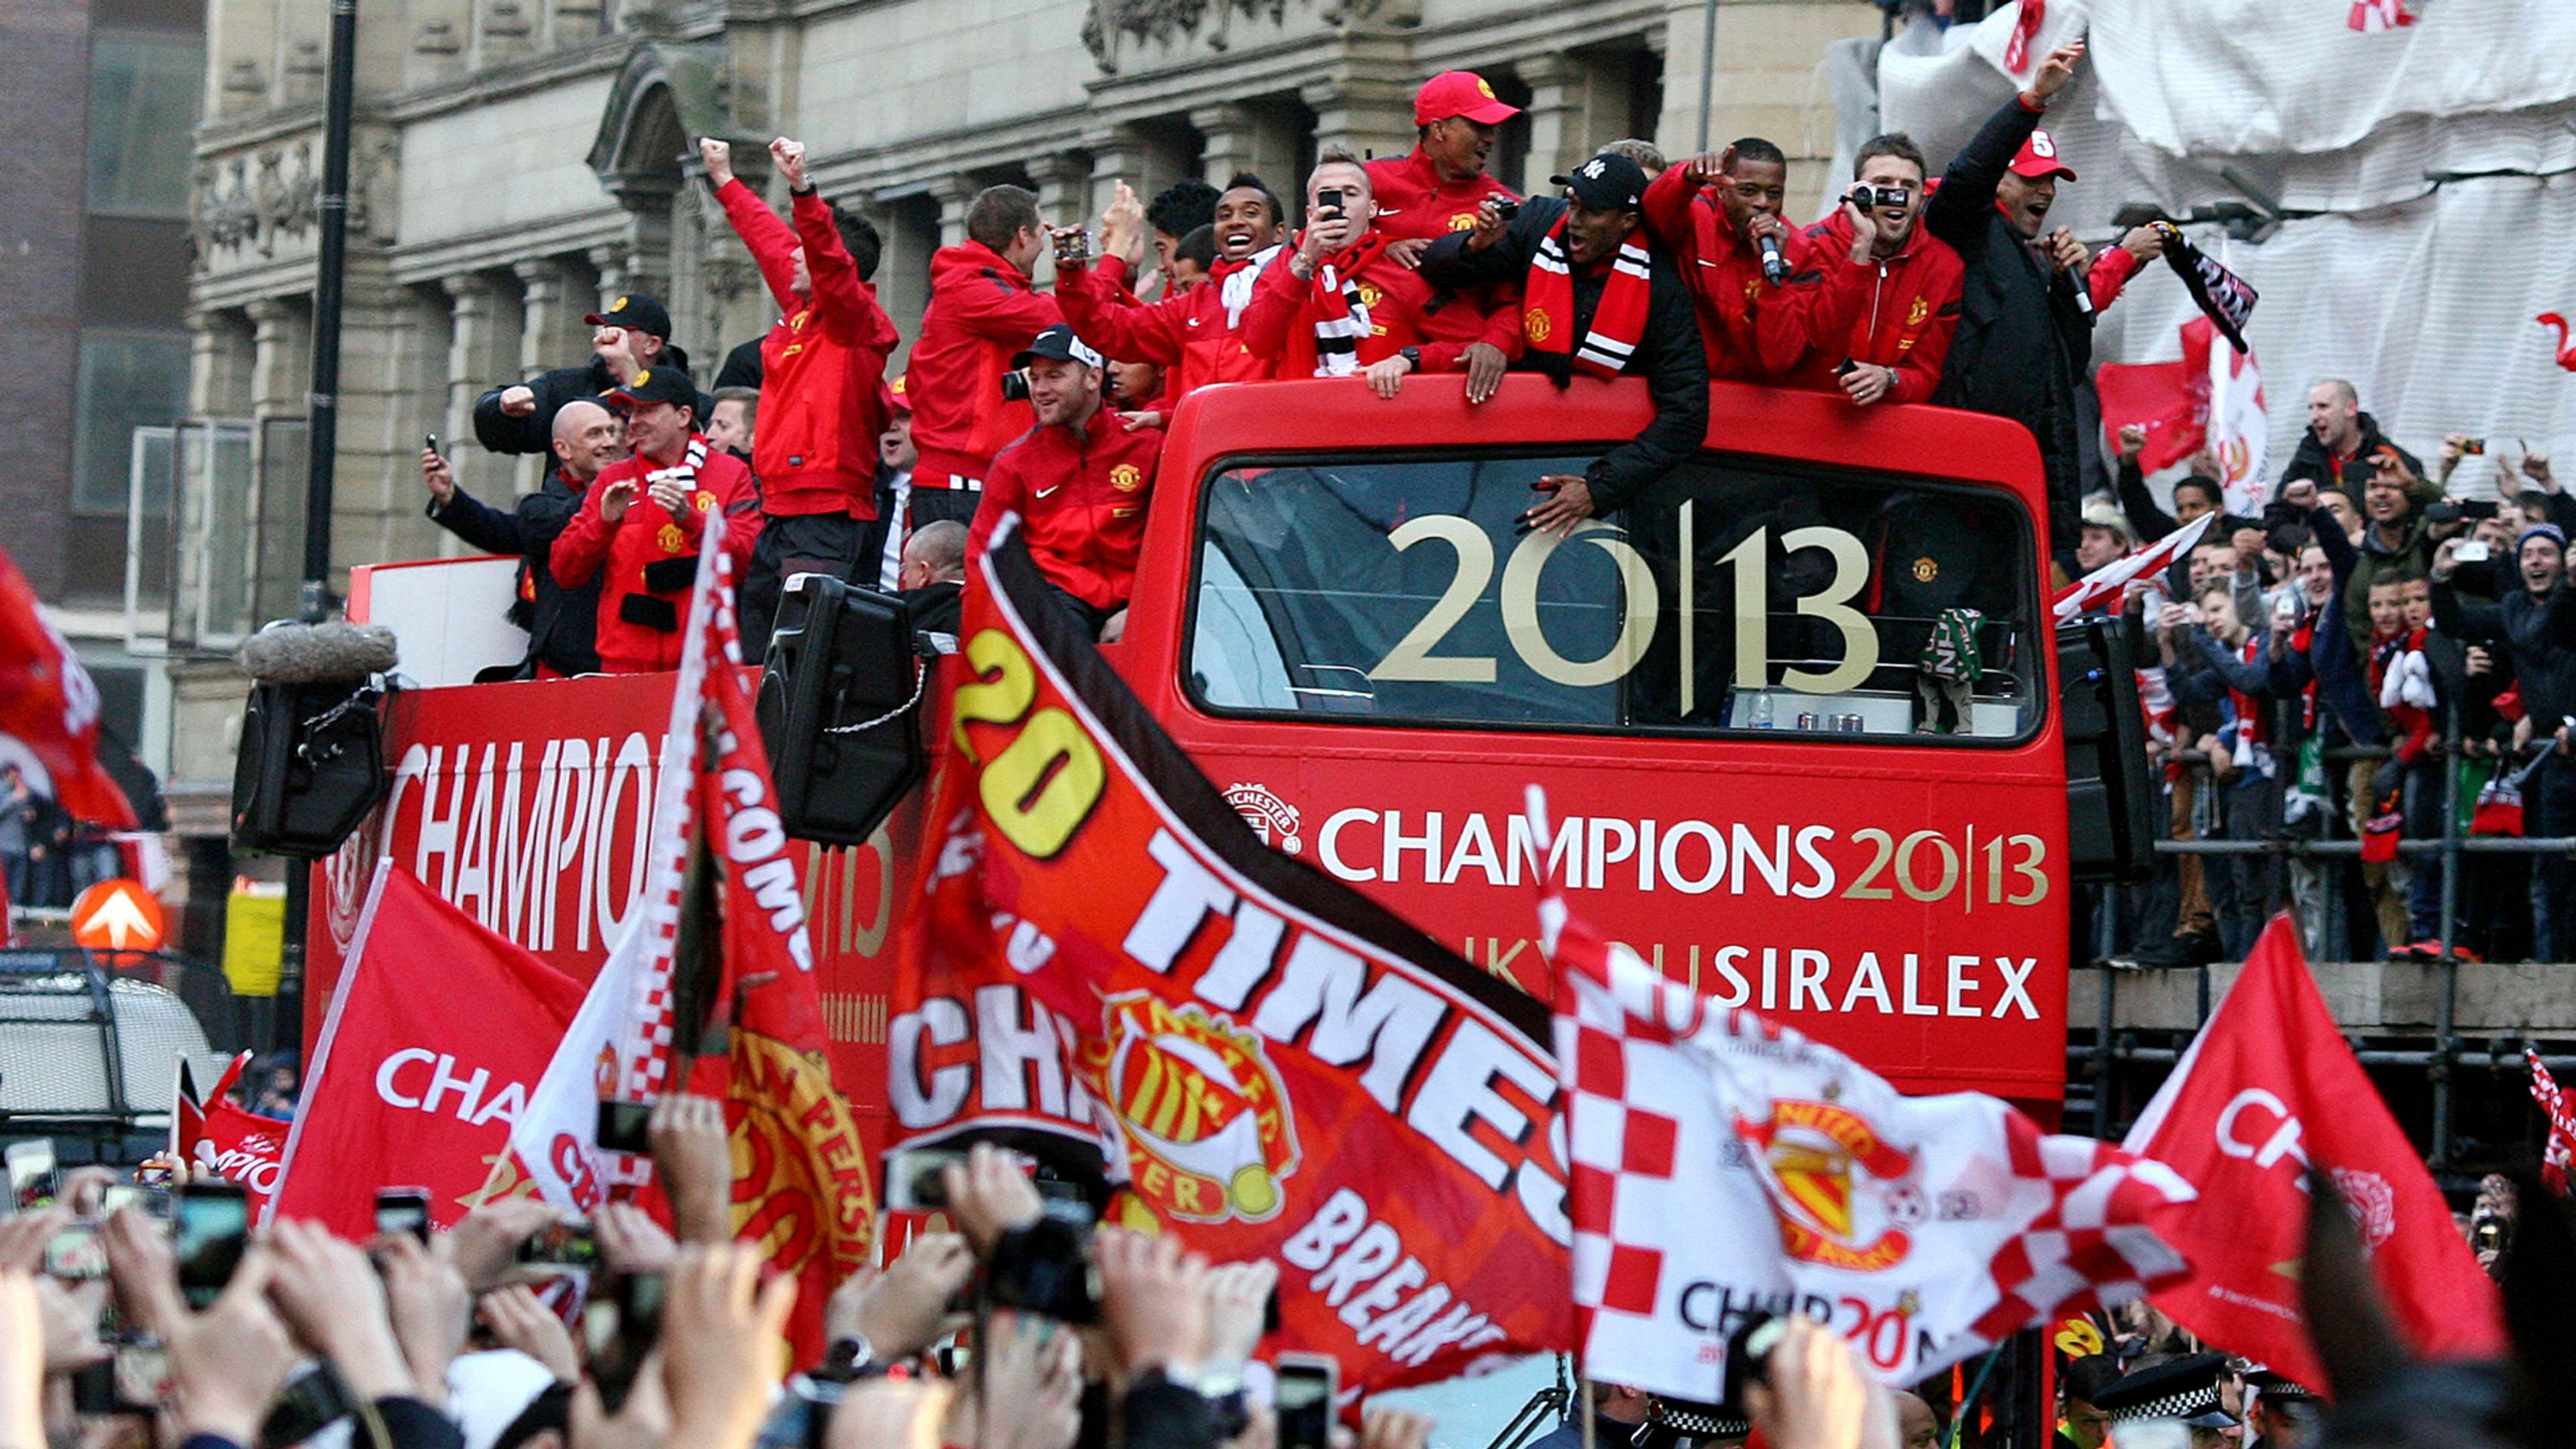 Manchester United bus parade 2013